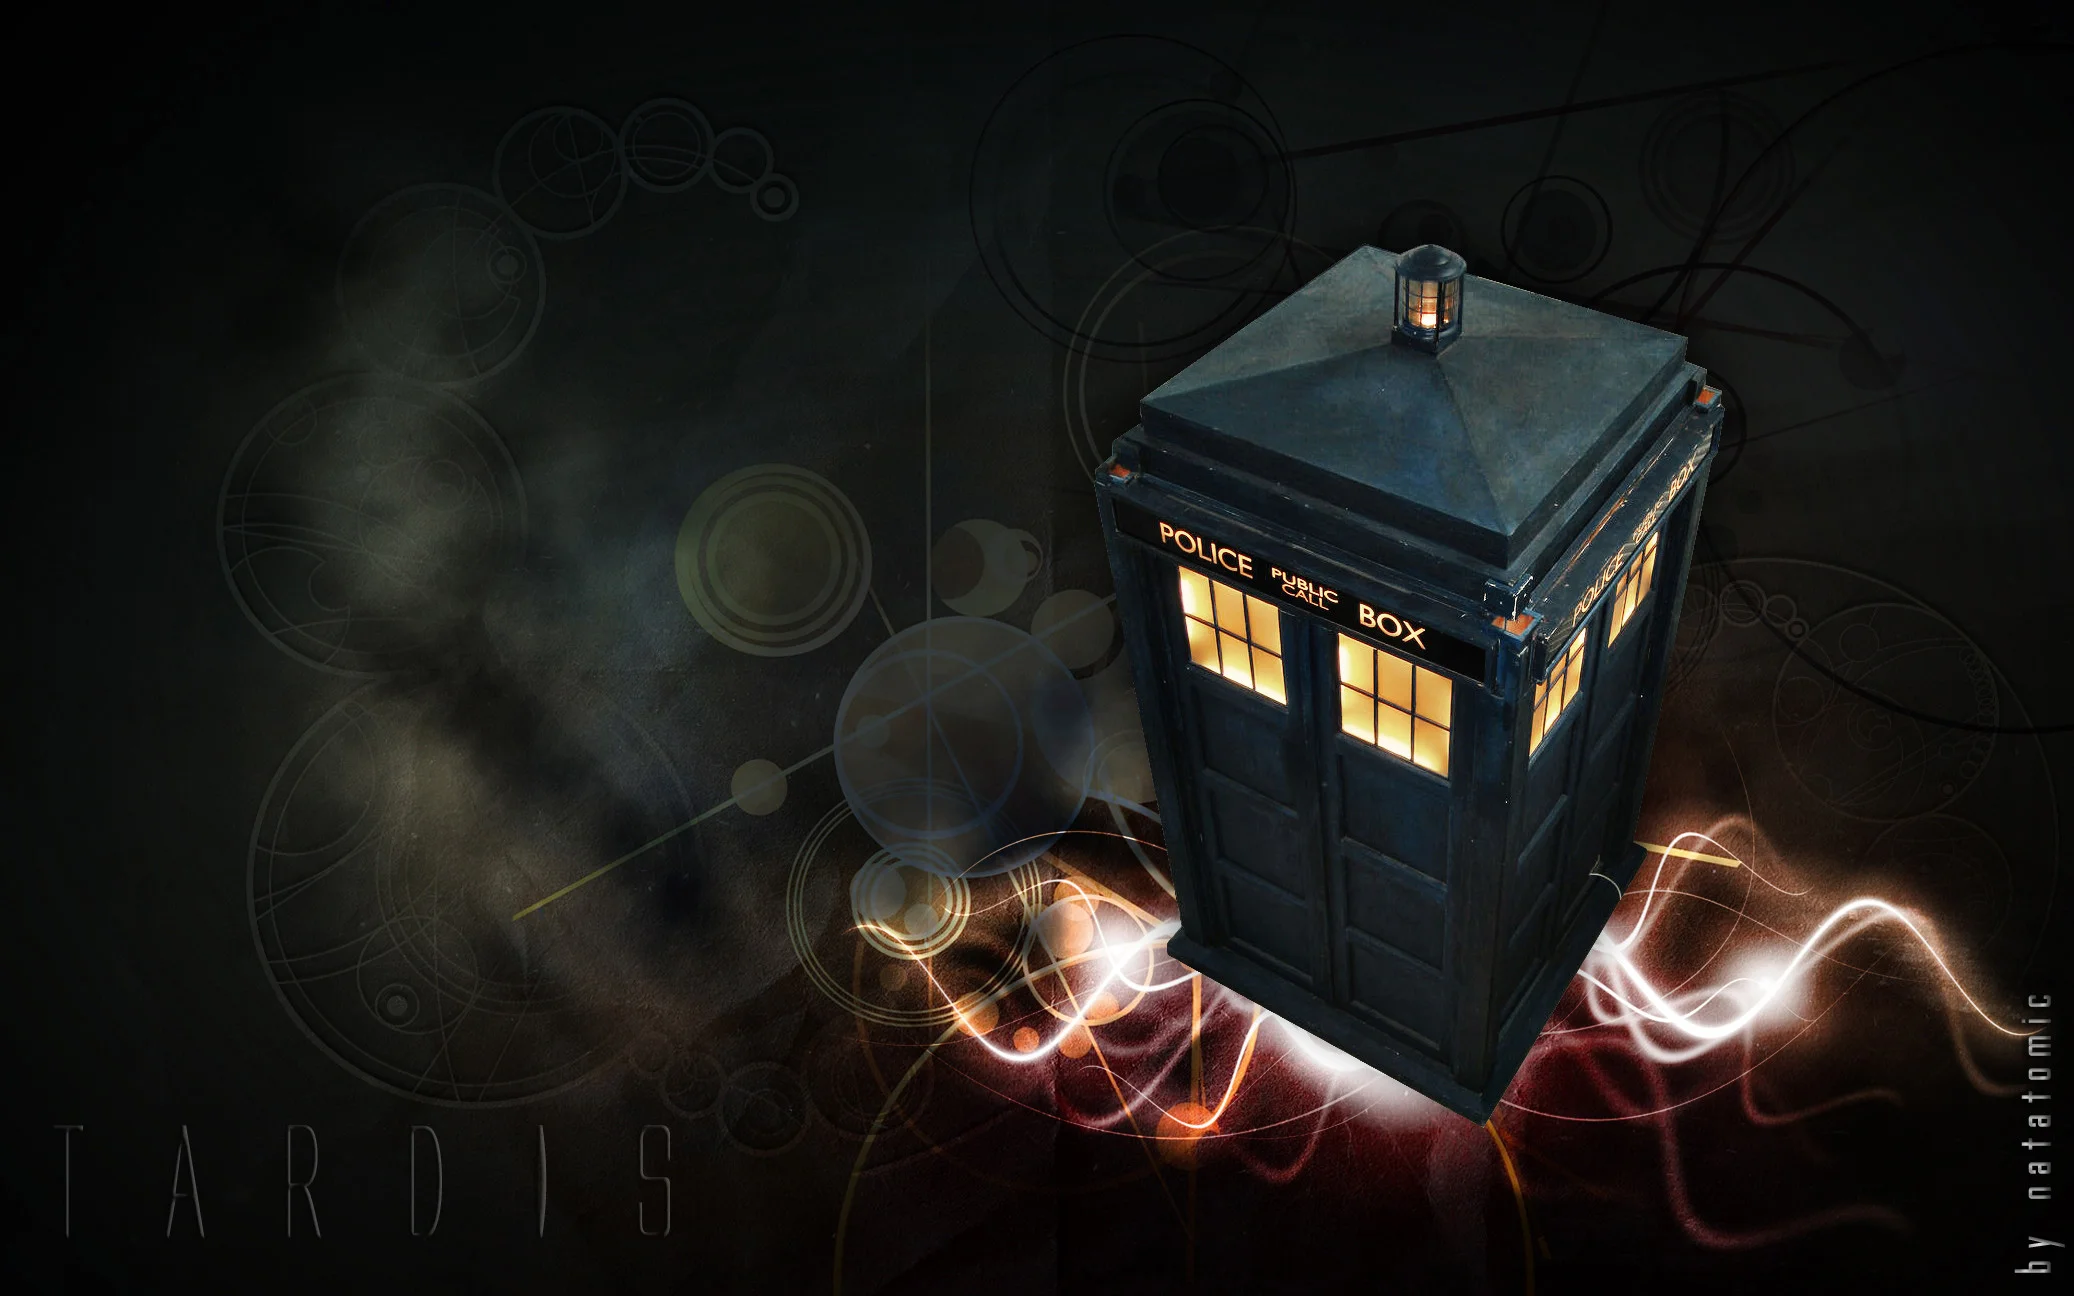 best ideas about Doctor who wallpaper on Pinterest Tardis | HD Wallpapers |  Pinterest | 3d wallpaper, Wallpaper and Hd wallpaper